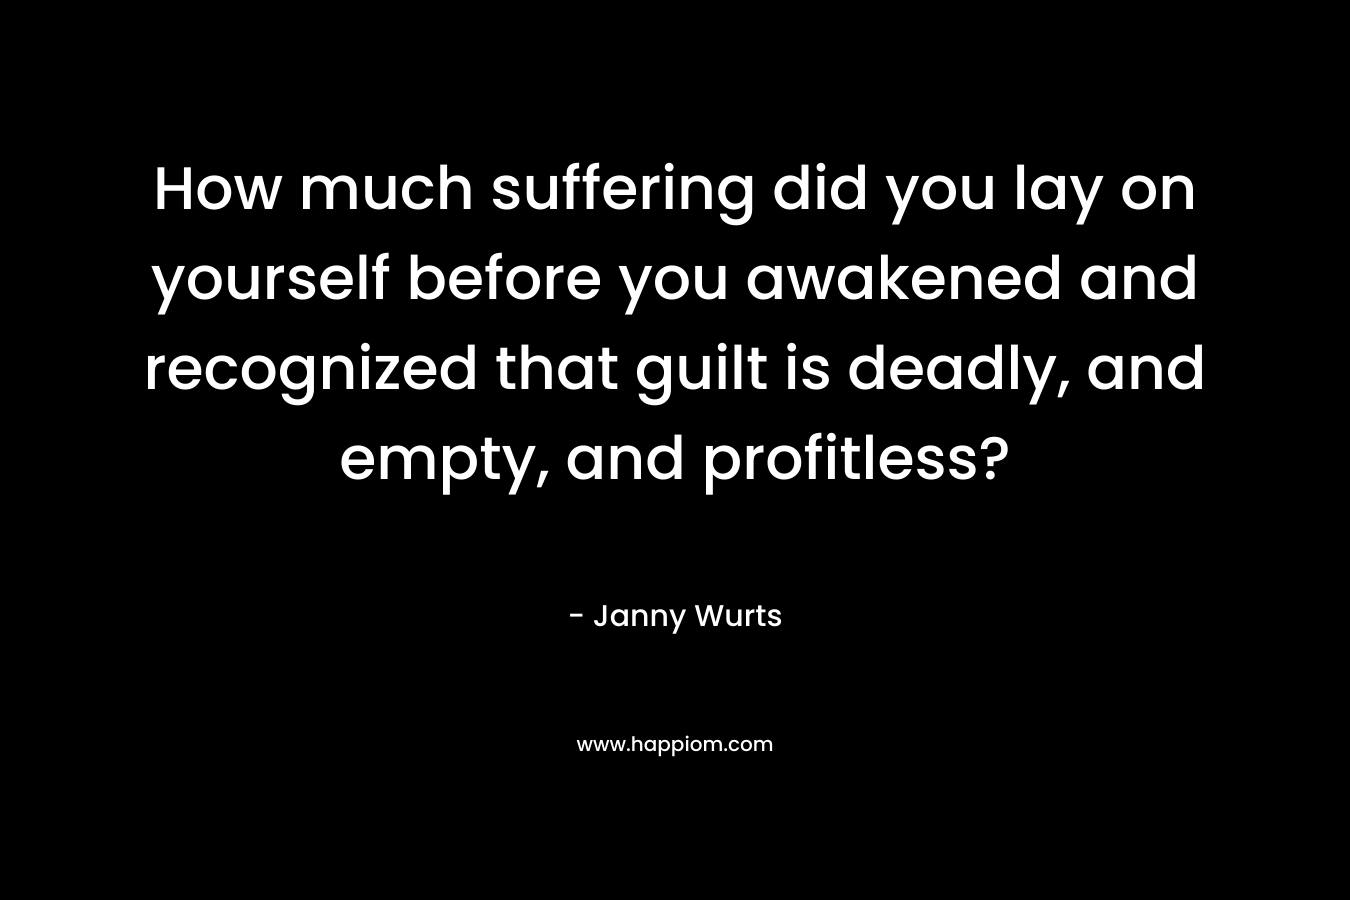 How much suffering did you lay on yourself before you awakened and recognized that guilt is deadly, and empty, and profitless? – Janny Wurts